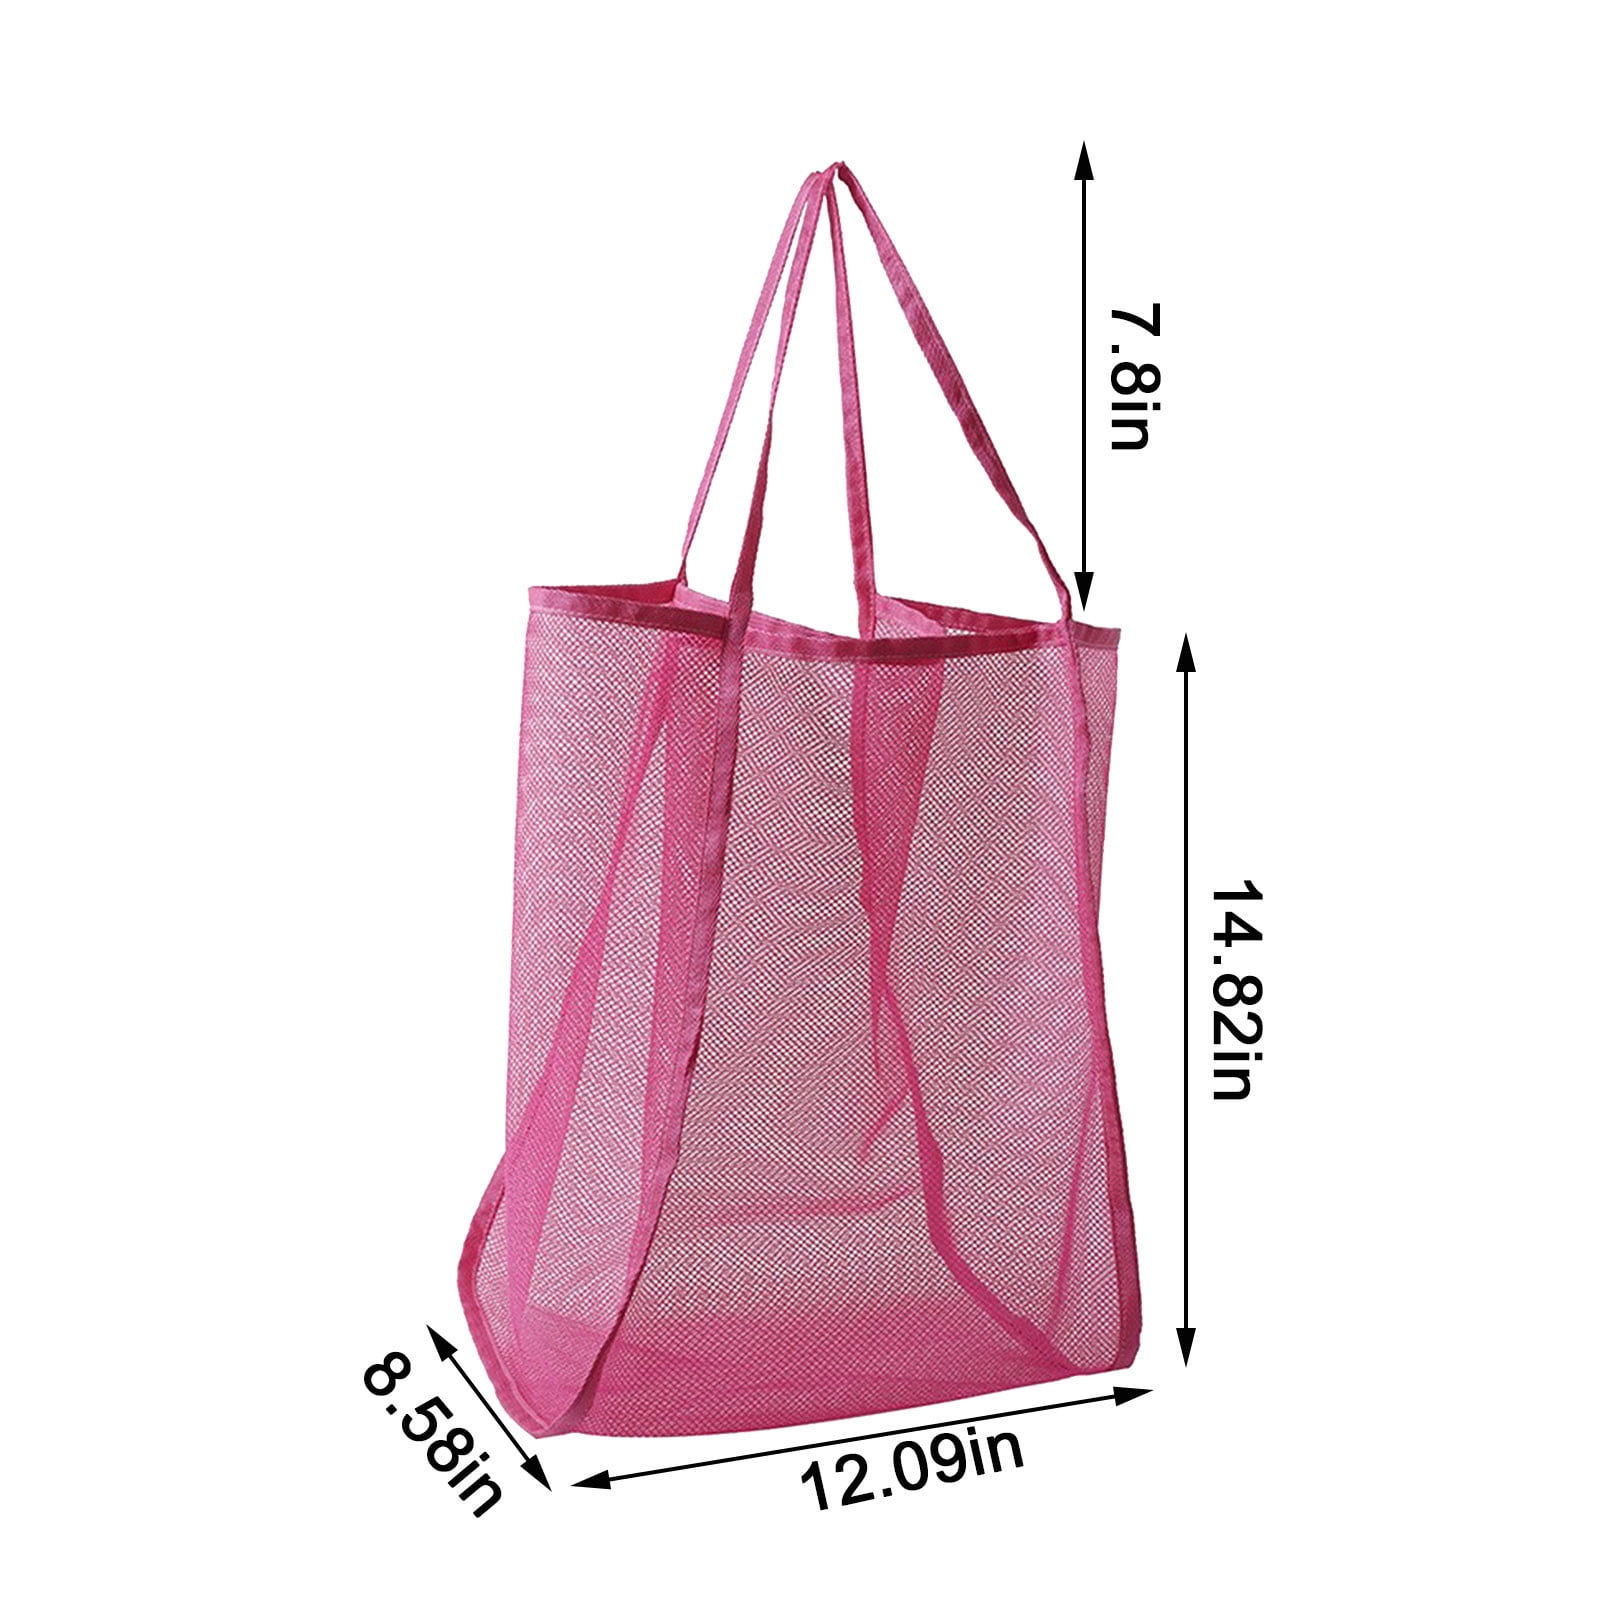 Sdjma Clear Tote Bag Stadium Approved, 31L Large Clear Vinyl Shoulder Handbag with Zipper for Women Man, Durable Waterproof Travel Bag for Beach